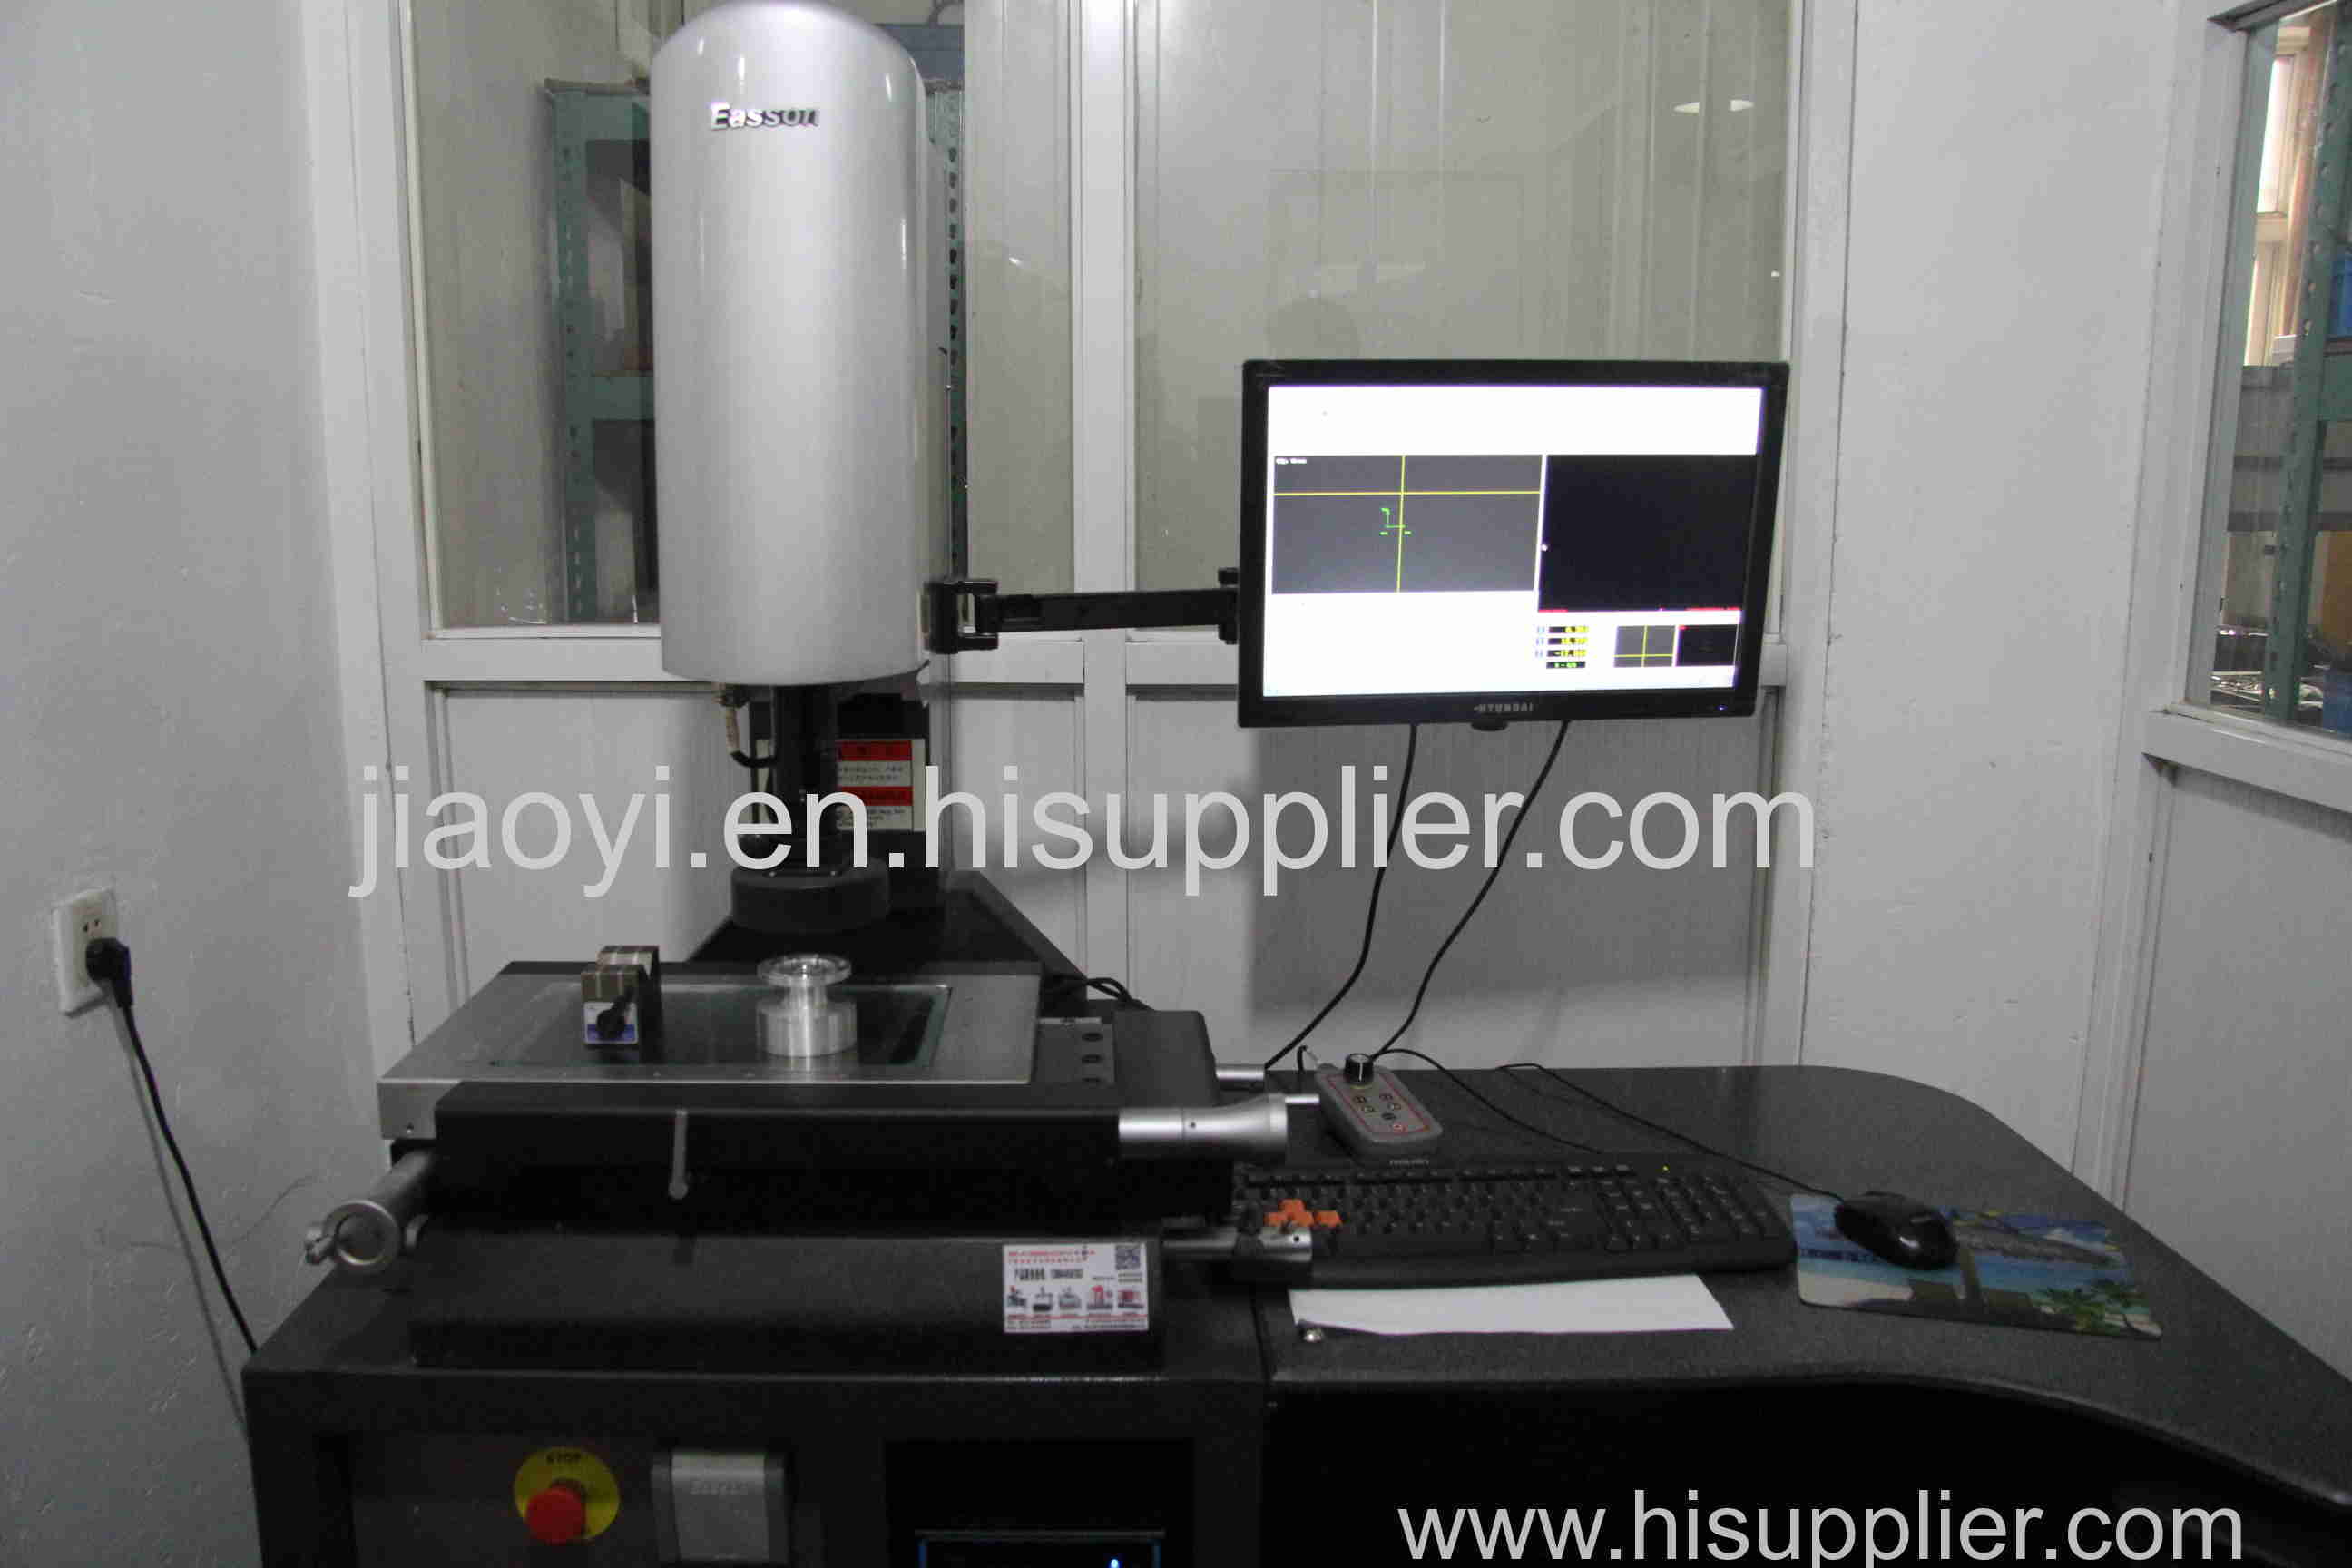 Automatic image measuring instrument